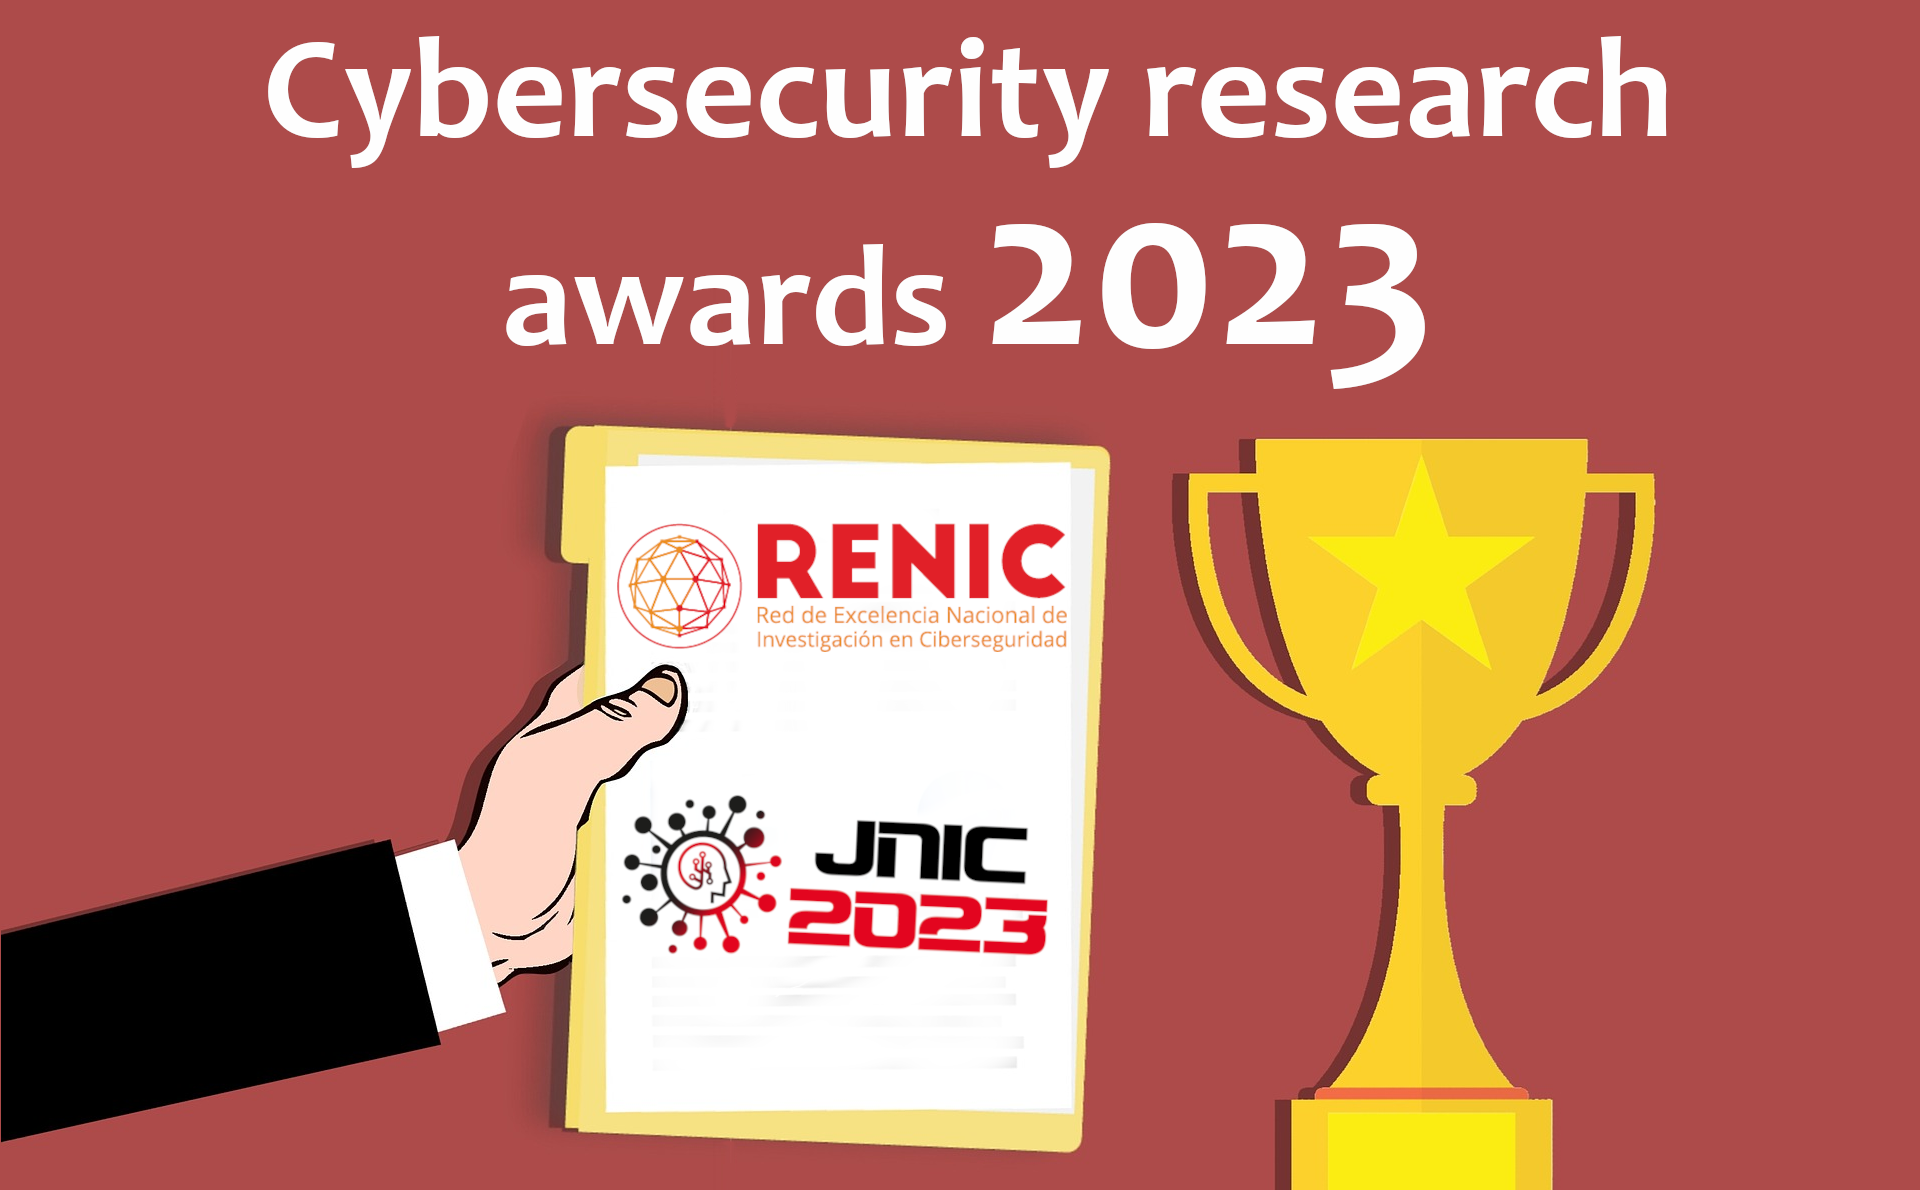 Cybersecurity Research Awards 2023 convened